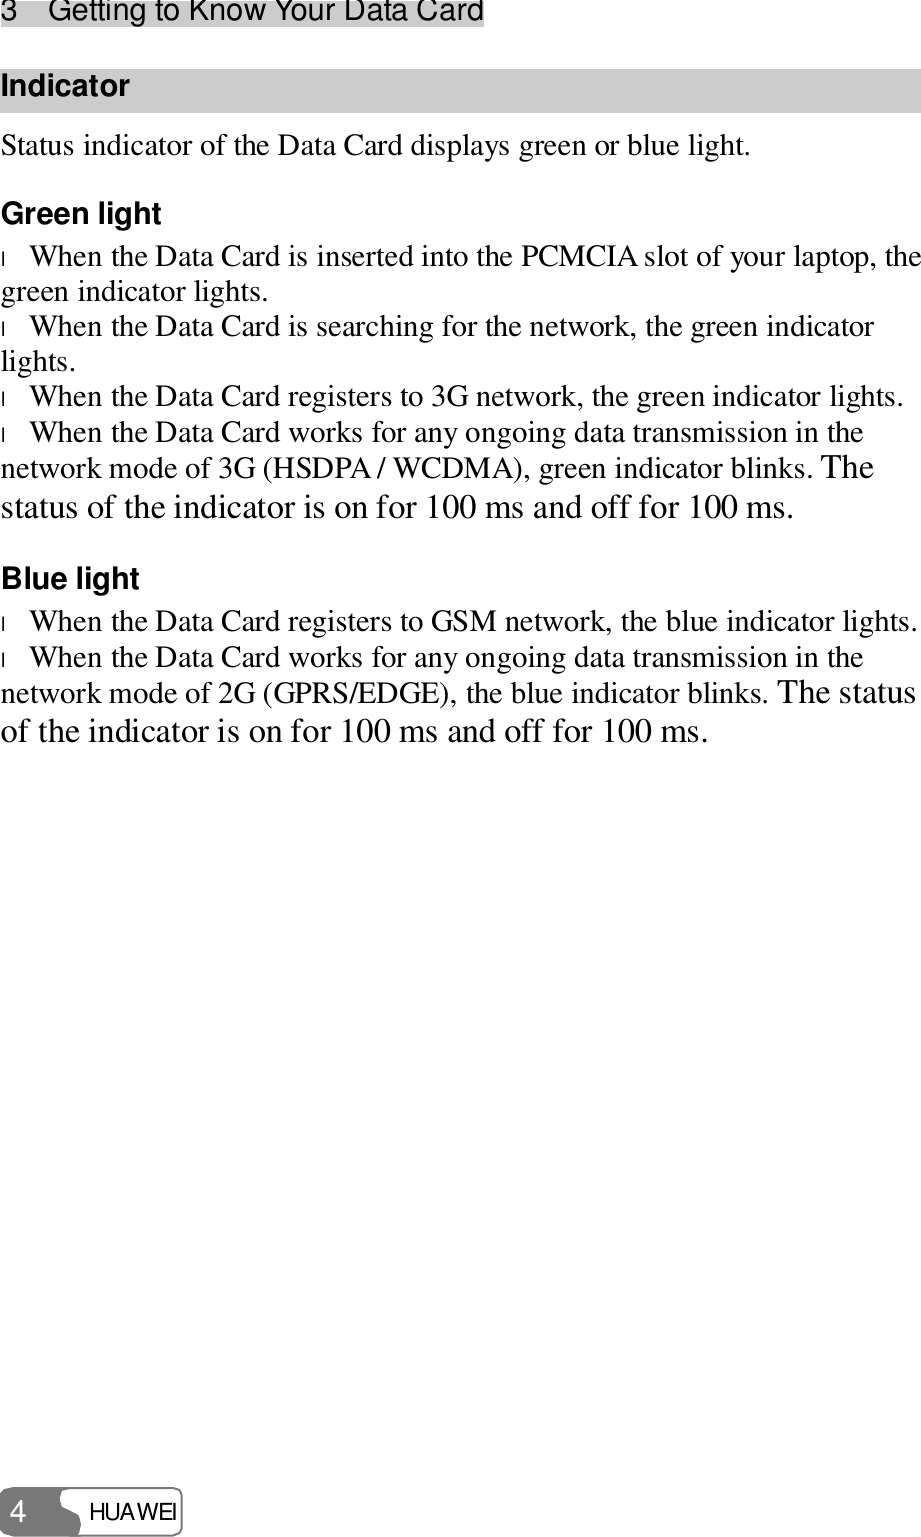 3  Getting to Know Your Data Card HUAWEI  4 Indicator Status indicator of the Data Card displays green or blue light. Green light l When the Data Card is inserted into the PCMCIA slot of your laptop, the green indicator lights. l When the Data Card is searching for the network, the green indicator lights. l When the Data Card registers to 3G network, the green indicator lights. l When the Data Card works for any ongoing data transmission in the network mode of 3G (HSDPA / WCDMA), green indicator blinks. The status of the indicator is on for 100 ms and off for 100 ms. Blue light l When the Data Card registers to GSM network, the blue indicator lights. l When the Data Card works for any ongoing data transmission in the network mode of 2G (GPRS/EDGE), the blue indicator blinks. The status of the indicator is on for 100 ms and off for 100 ms. 